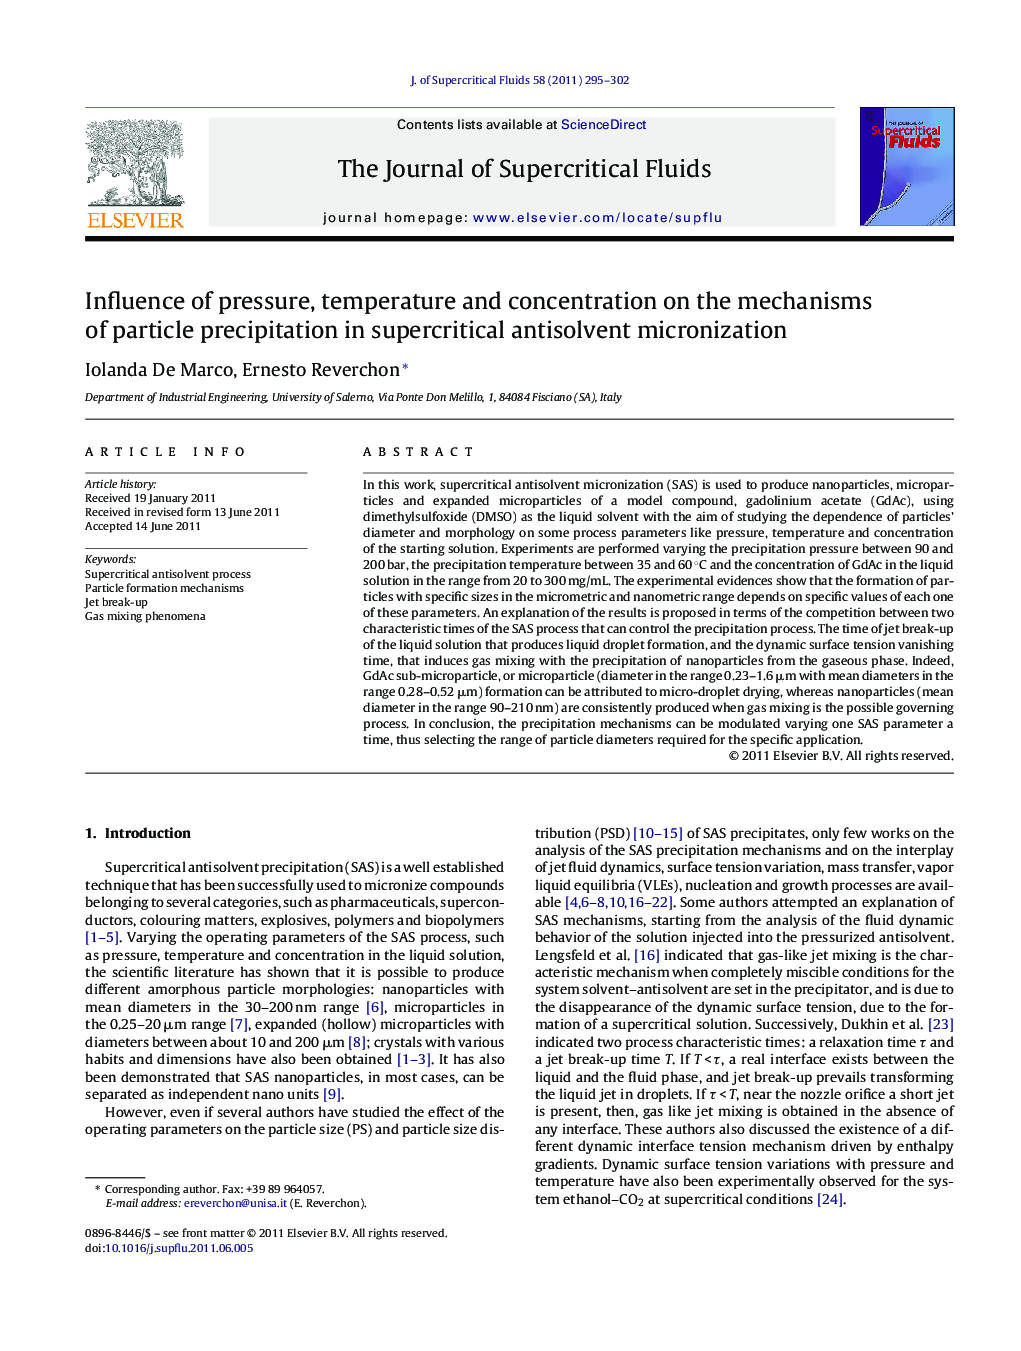 Influence of pressure, temperature and concentration on the mechanisms of particle precipitation in supercritical antisolvent micronization